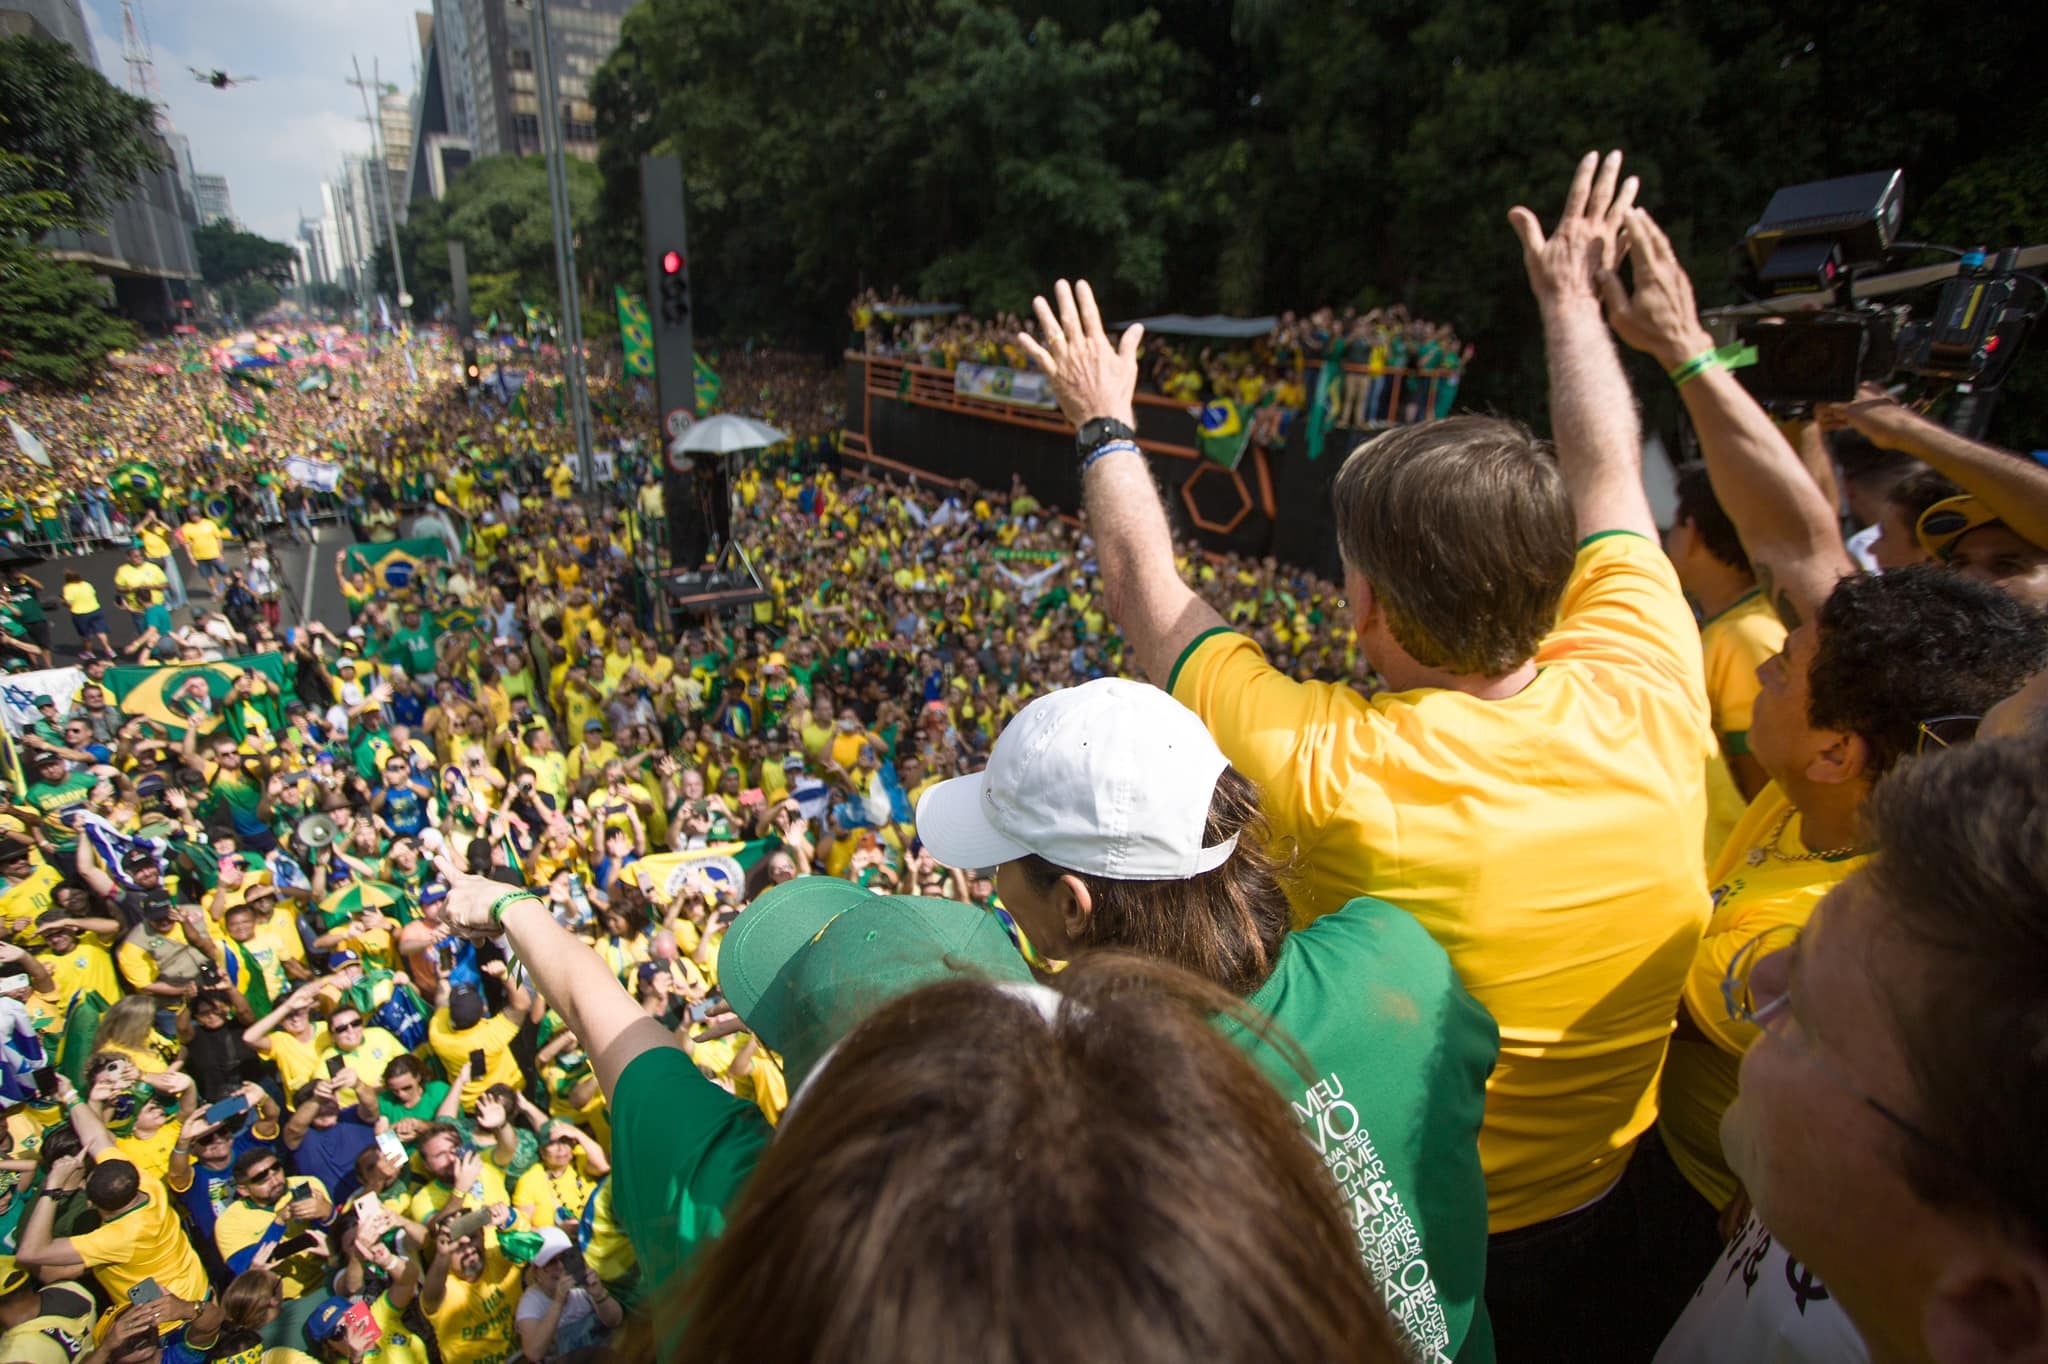 Bolsonaro waves to the crowd during a demonstration in São Paulo (courtesy of Silas Malafaia facebook)